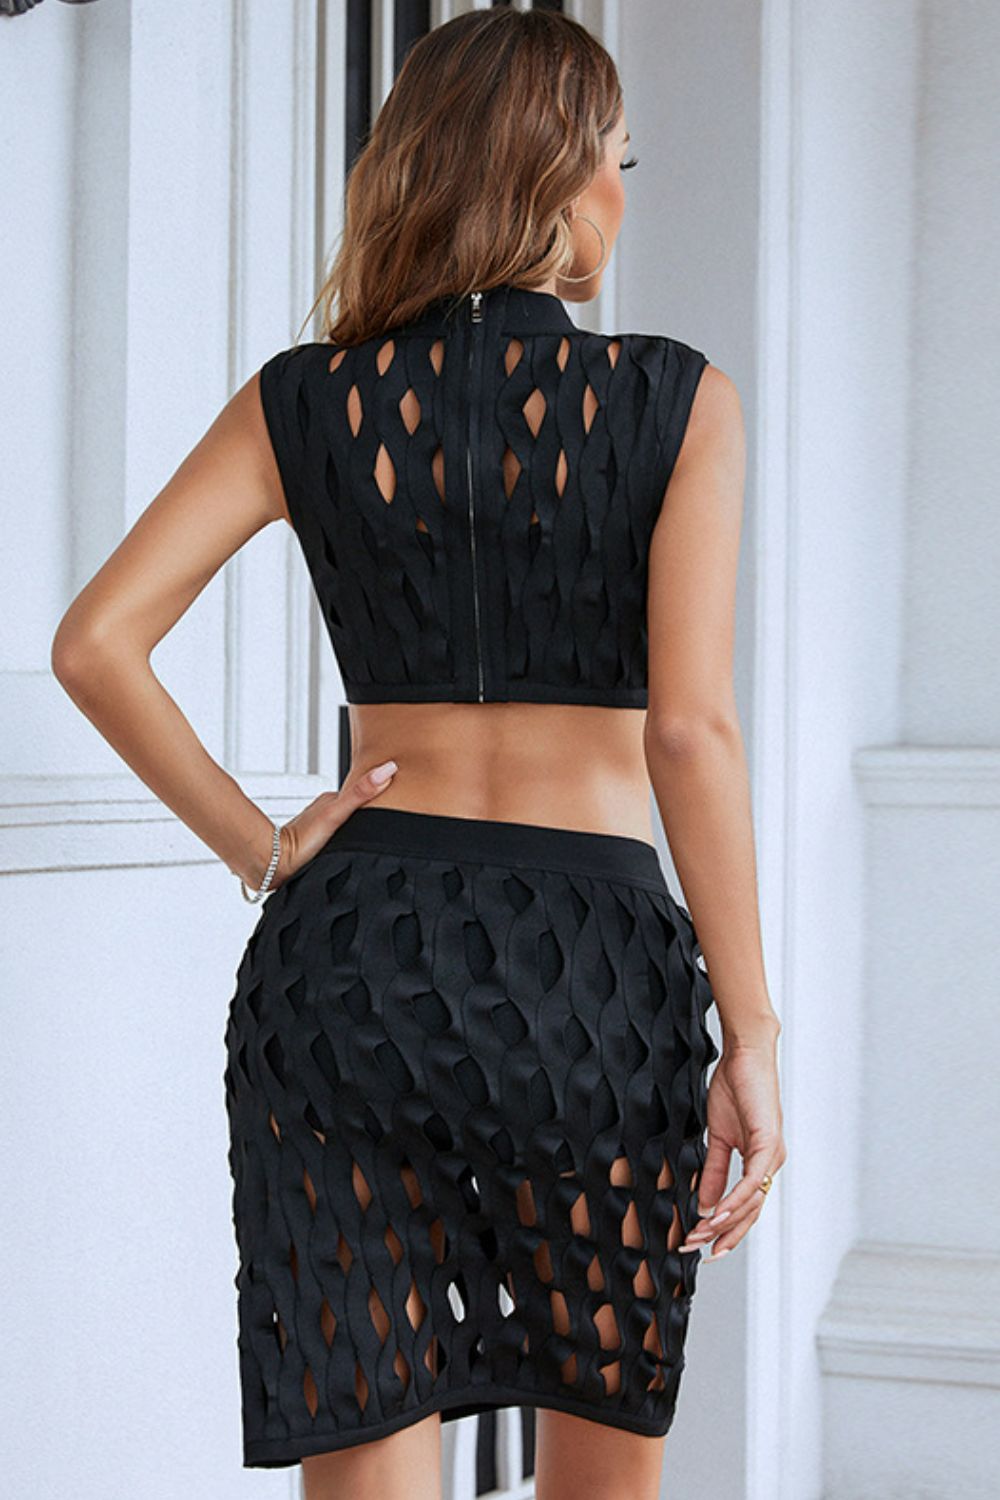 Openwork Cropped Top and Skirt Set - 2 colors - women's skirt set at TFC&H Co.